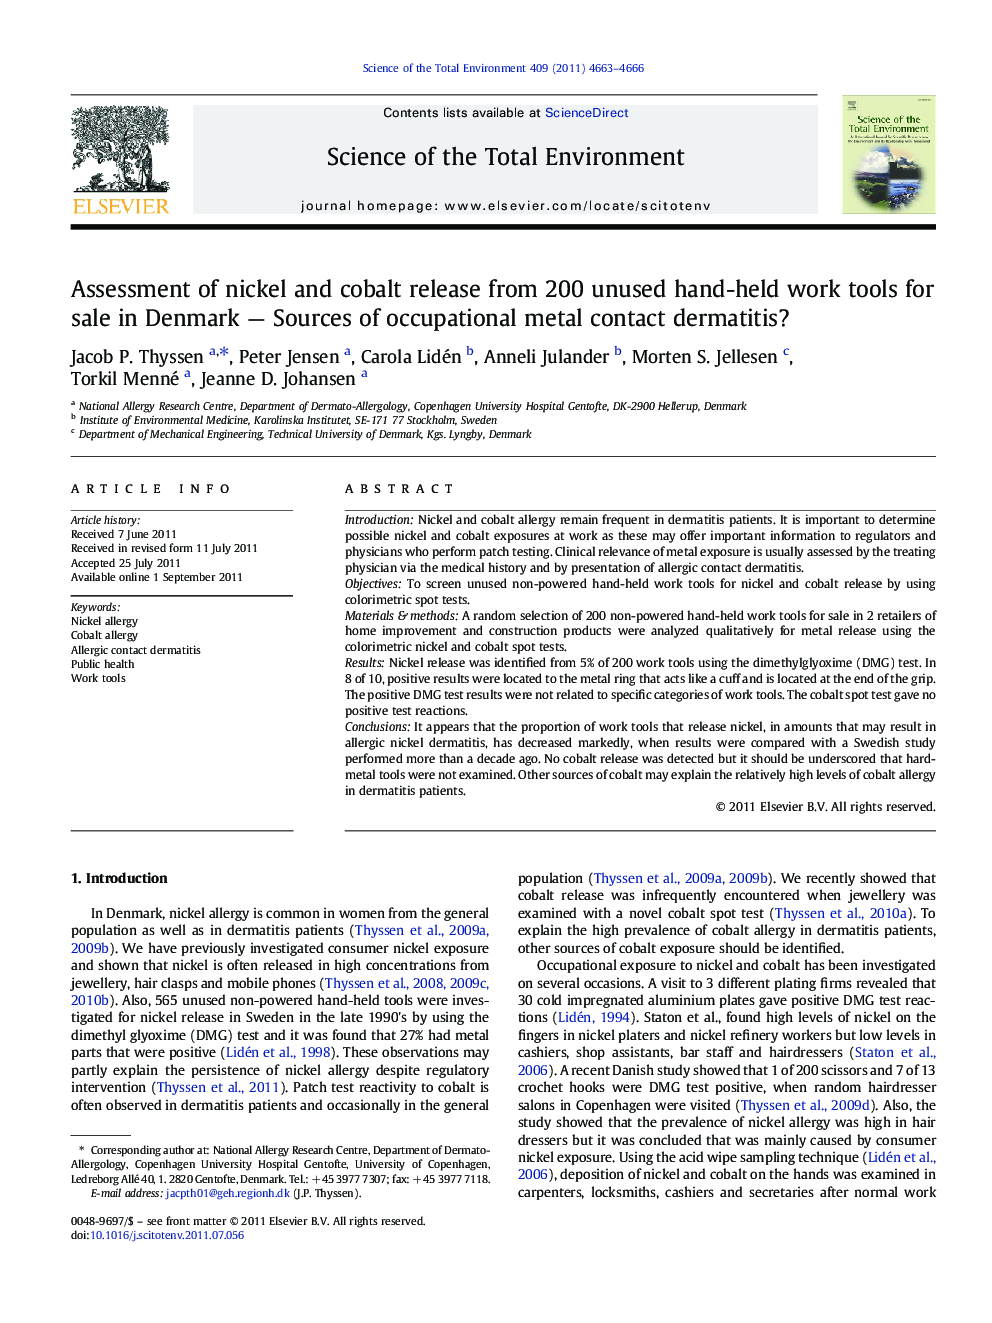 Assessment of nickel and cobalt release from 200 unused hand-held work tools for sale in Denmark — Sources of occupational metal contact dermatitis?